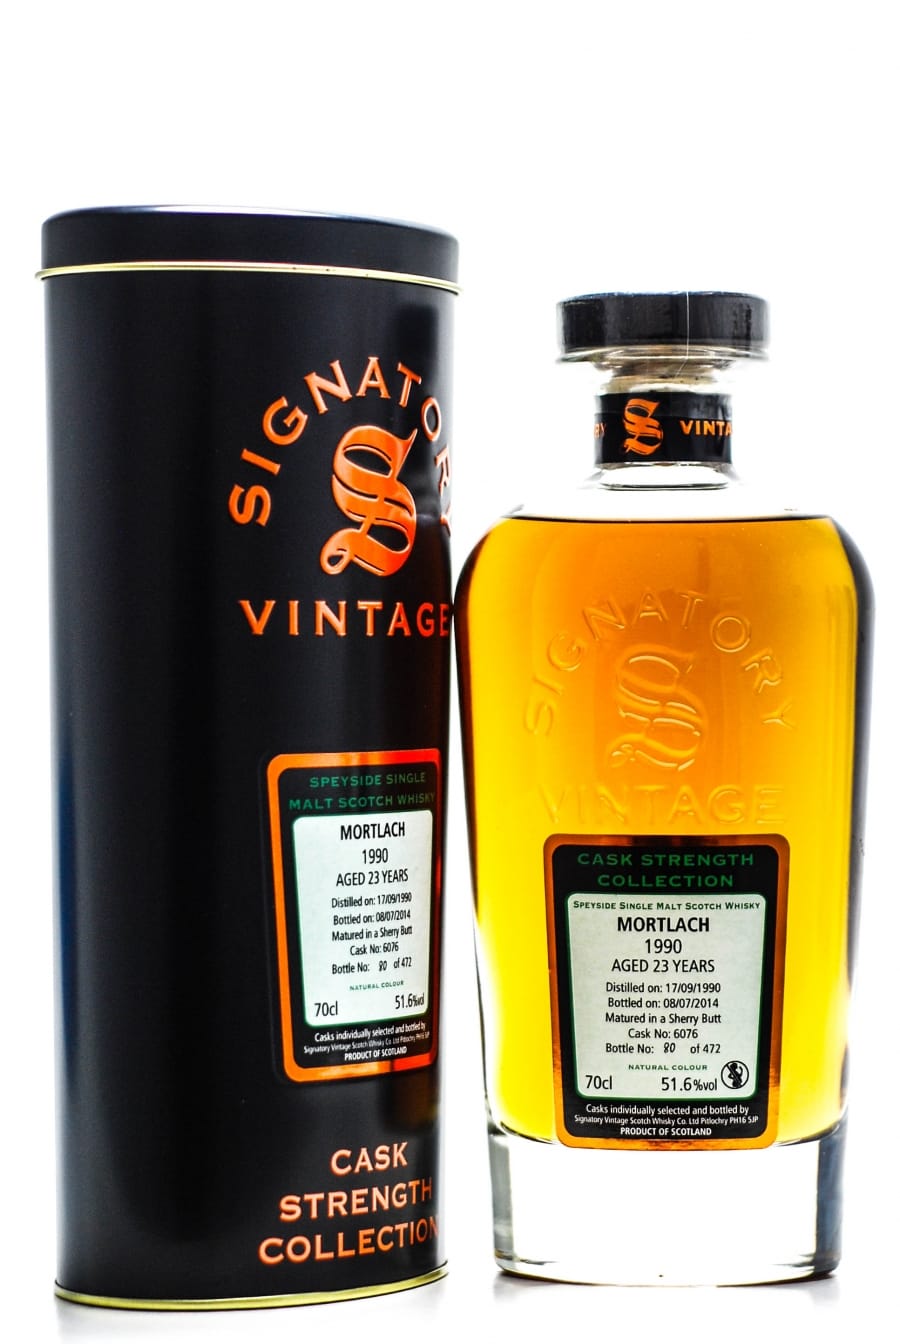 Mortlach - Mortlach 23 Years Old Signatory Vintage Cask Strength Collection Distilled: 17.09.1990 Bottled: 08.07.2014 Cask: 6076 1 Of 472 Bottles 51.6% 1990 In Original Container